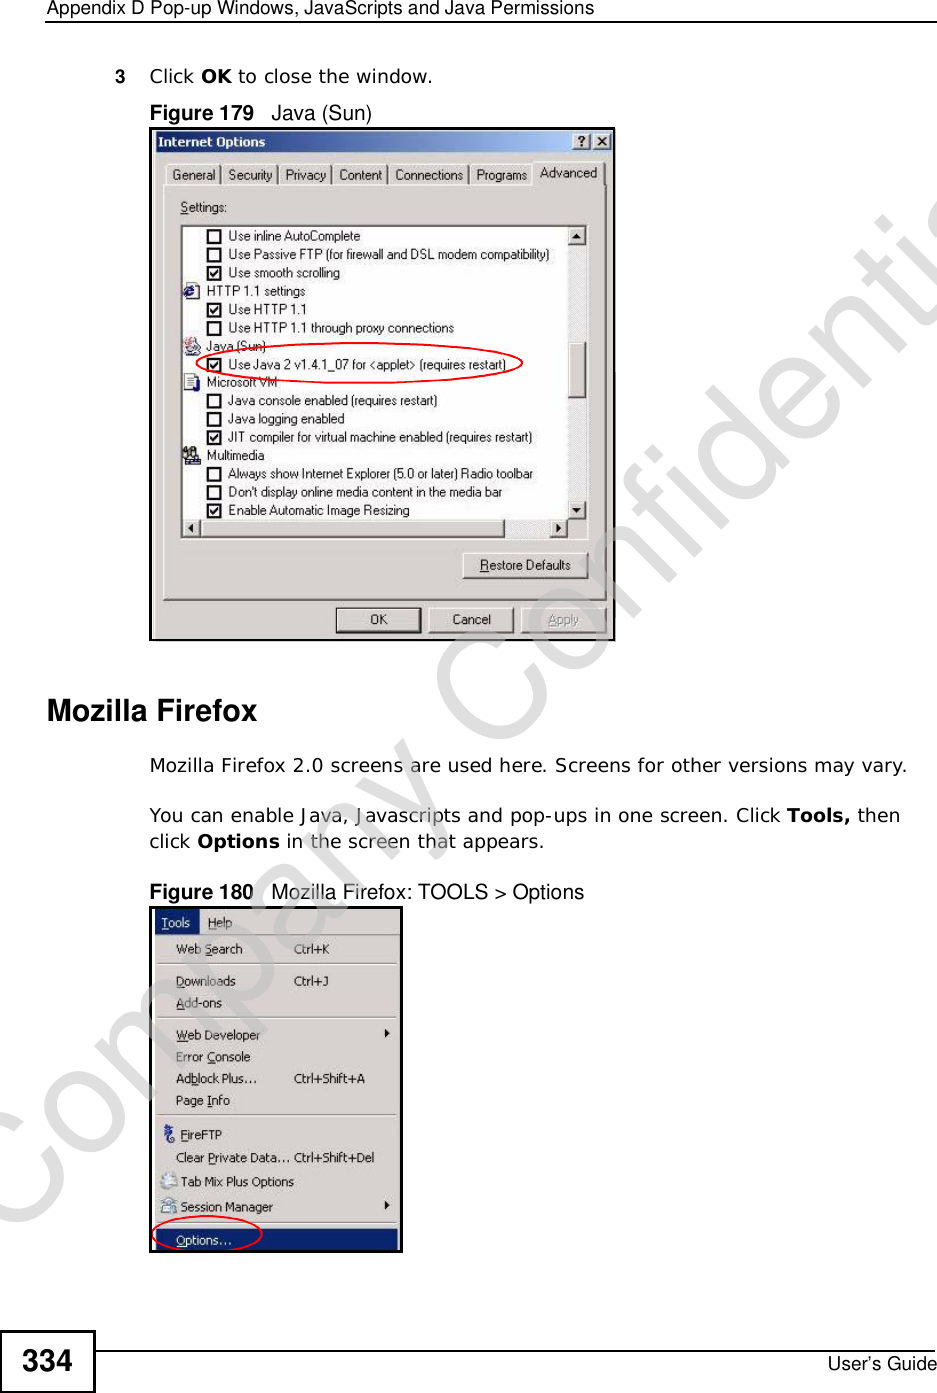 Appendix DPop-up Windows, JavaScripts and Java PermissionsUser’s Guide3343Click OK to close the window.Figure 179   Java (Sun)Mozilla FirefoxMozilla Firefox 2.0 screens are used here. Screens for other versions may vary. You can enable Java, Javascripts and pop-ups in one screen. Click Tools, then click Options in the screen that appears.Figure 180   Mozilla Firefox: TOOLS &gt; OptionsCompany Confidential